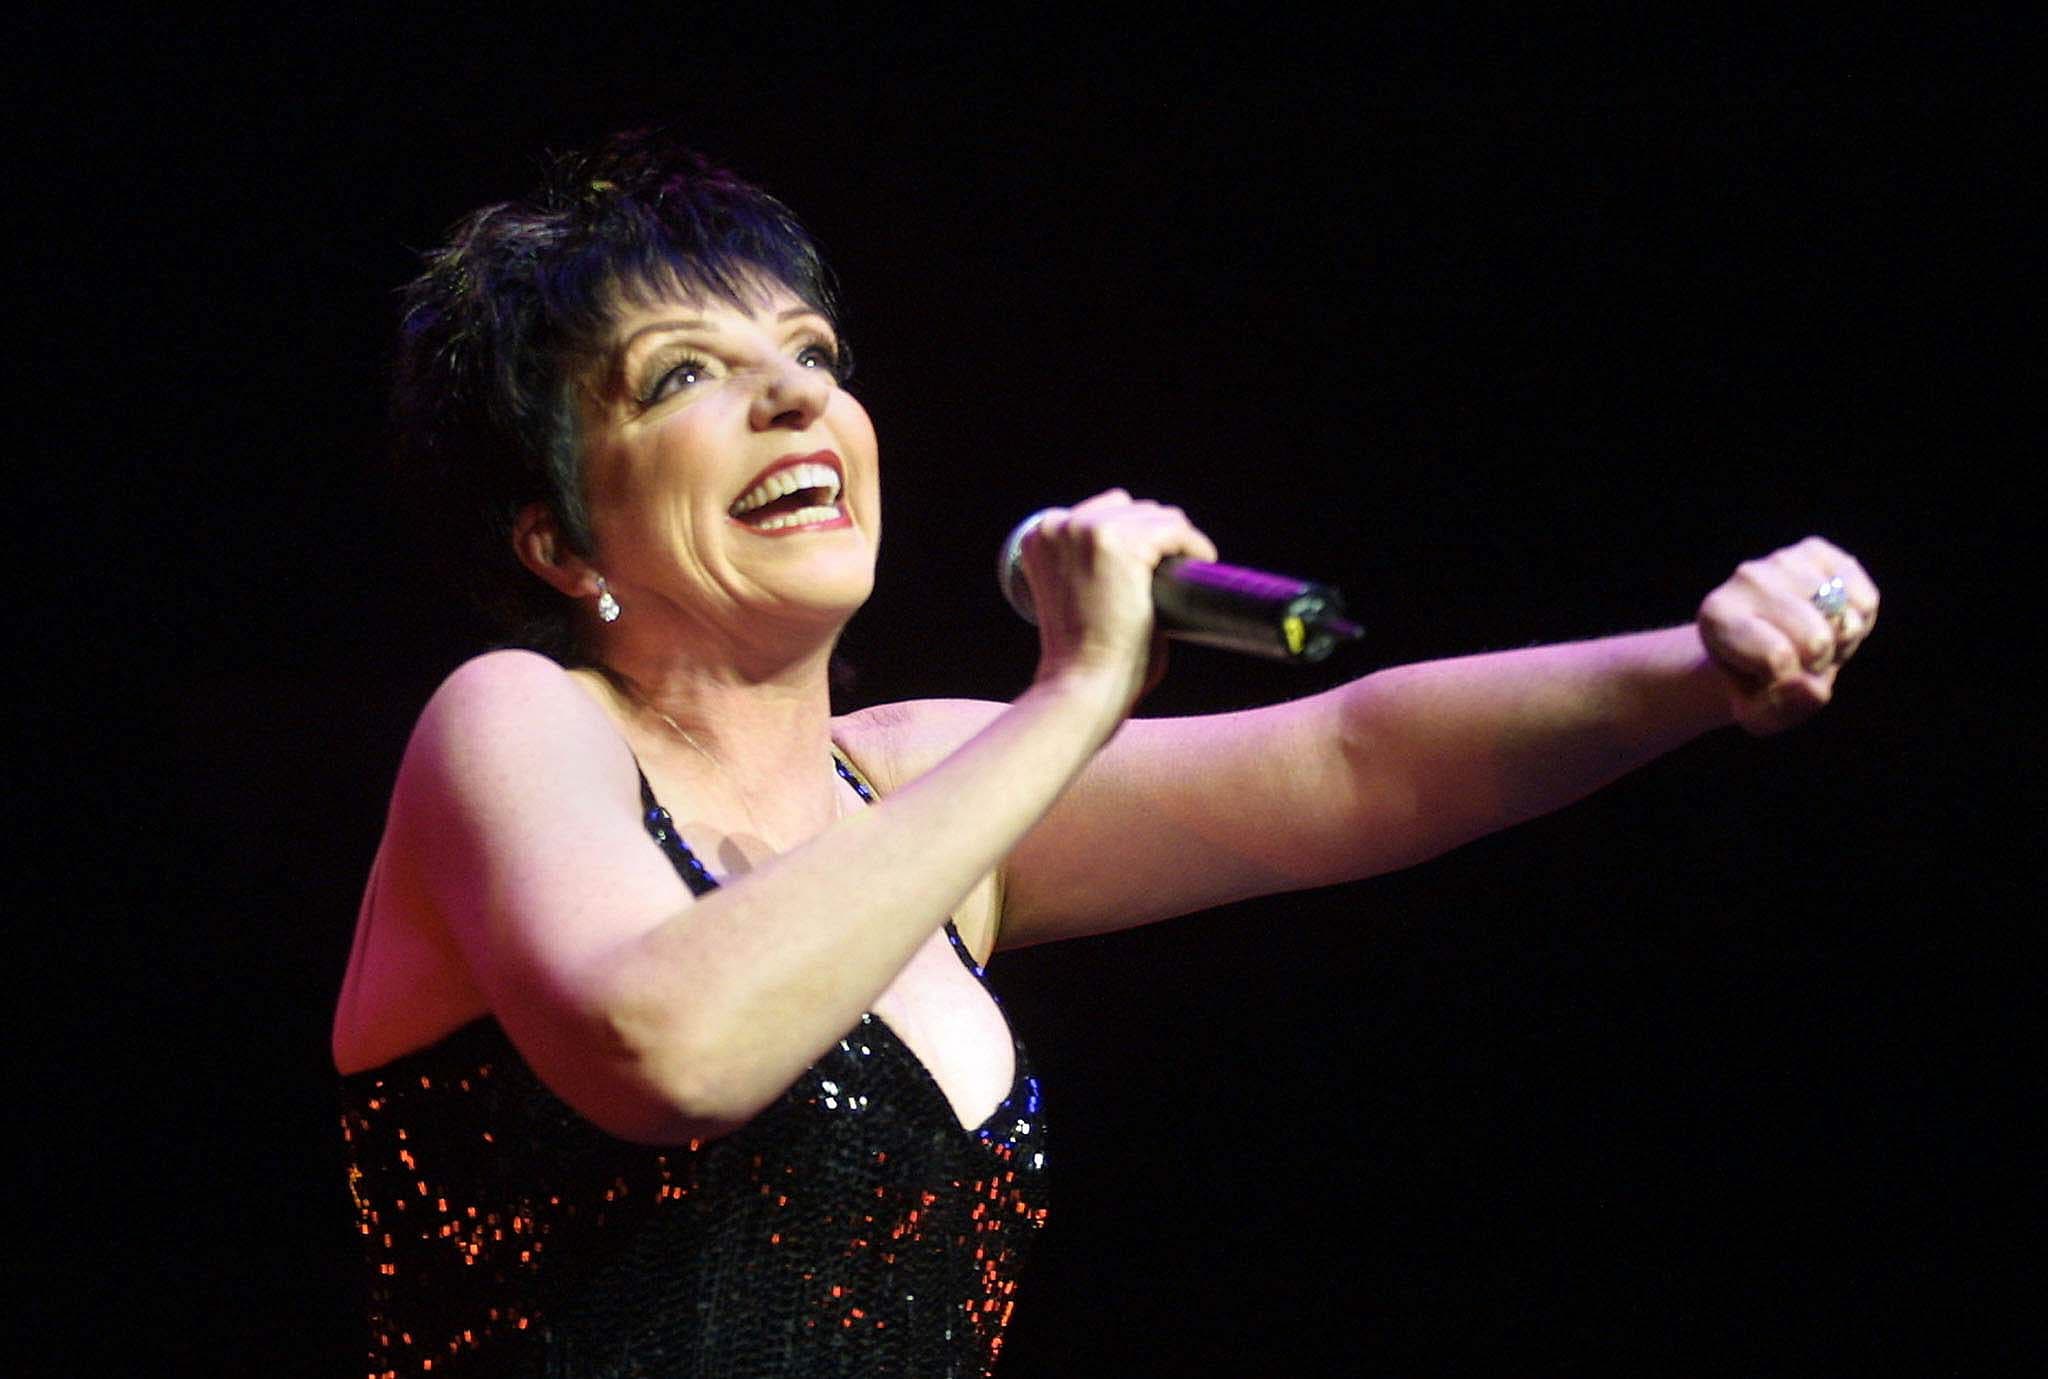 Singer and actress Liza Minnelli during a performance at London's Royal Albert Hall in 2002.